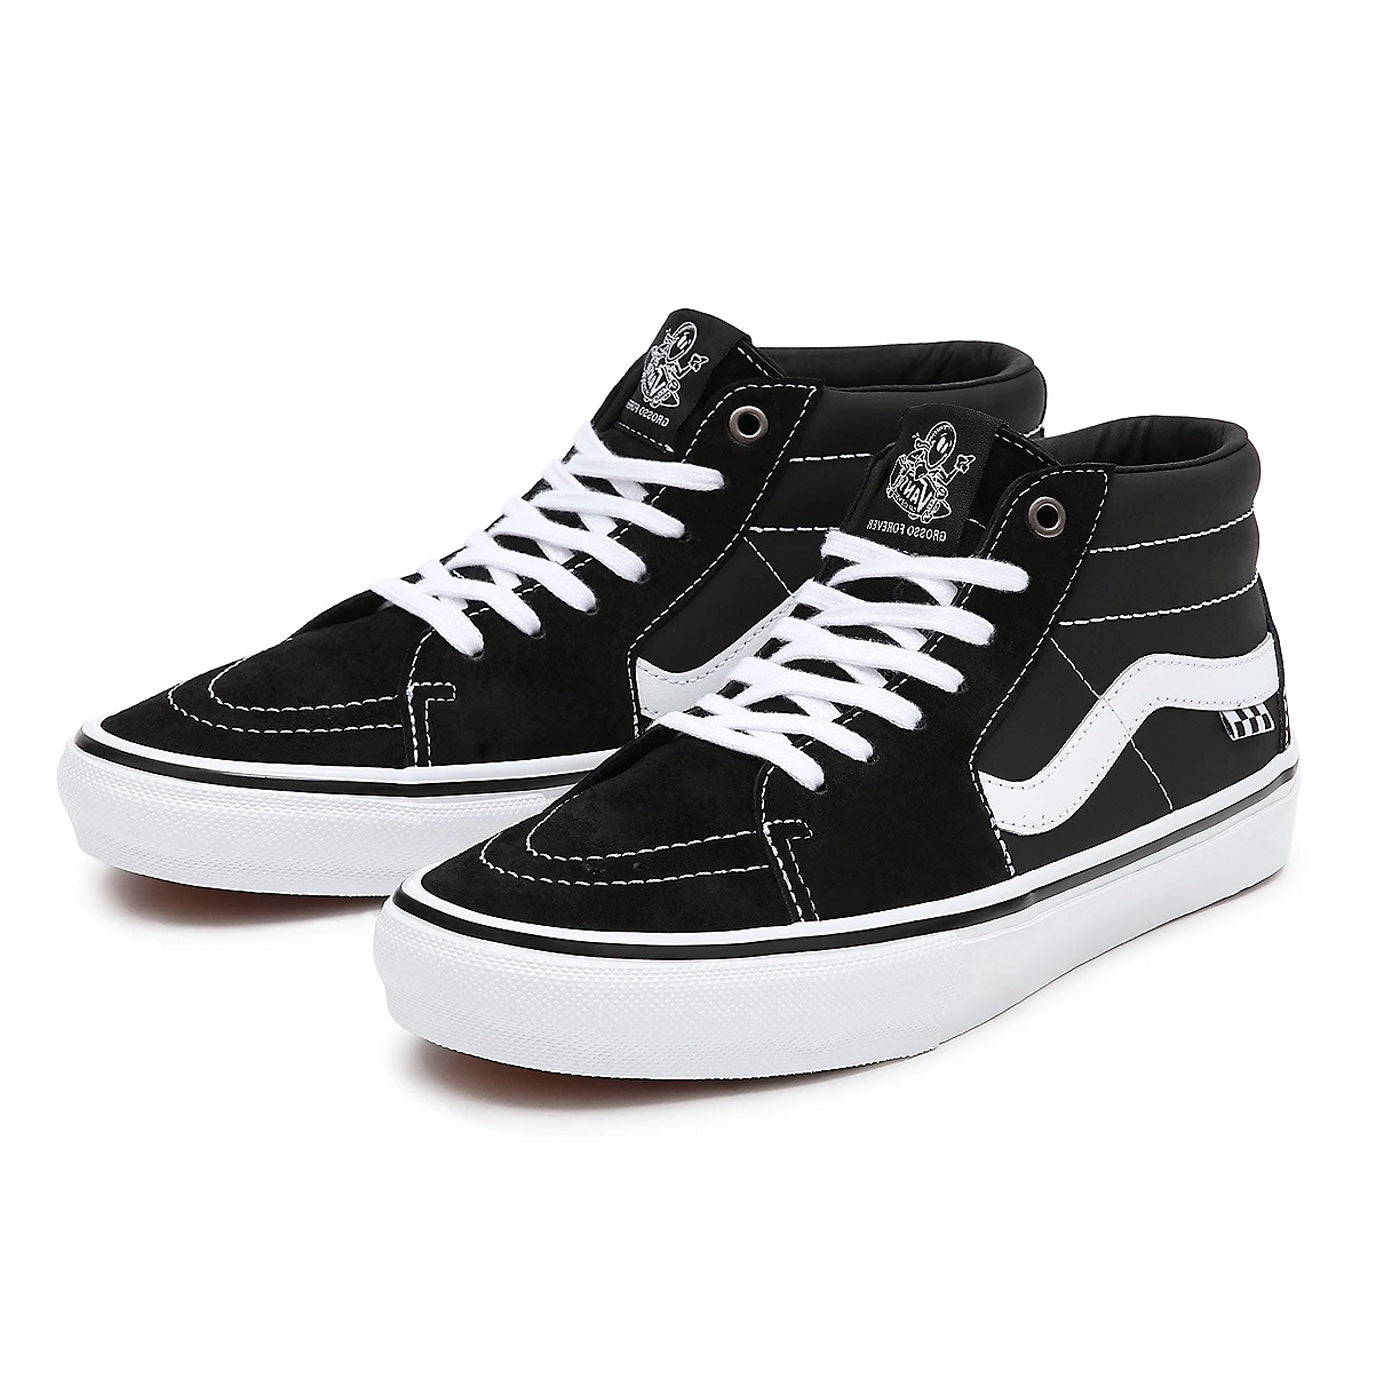 Black and white Jeff Grosso Vans mid top laced skate shoes with white sole. Free uk shipping over £50